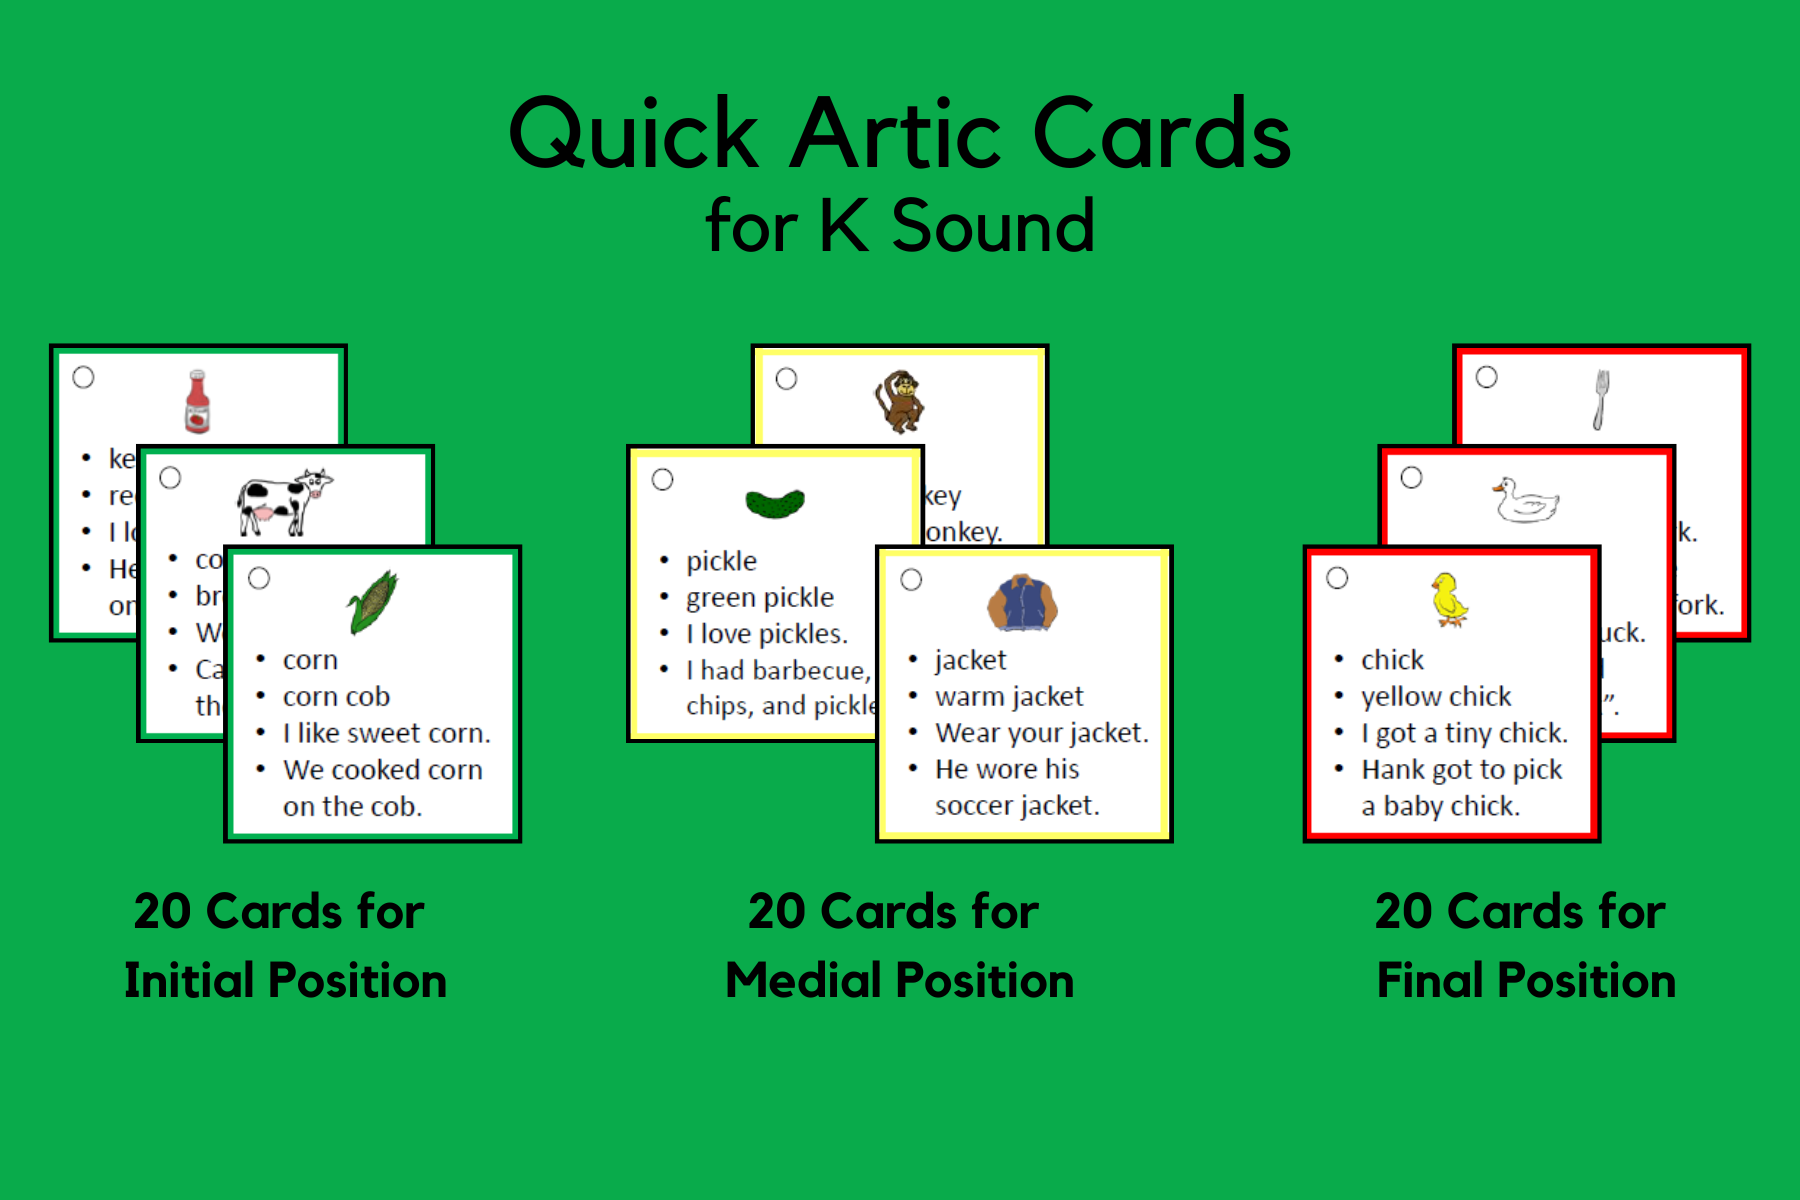 Quick Artic Cards for K Sound